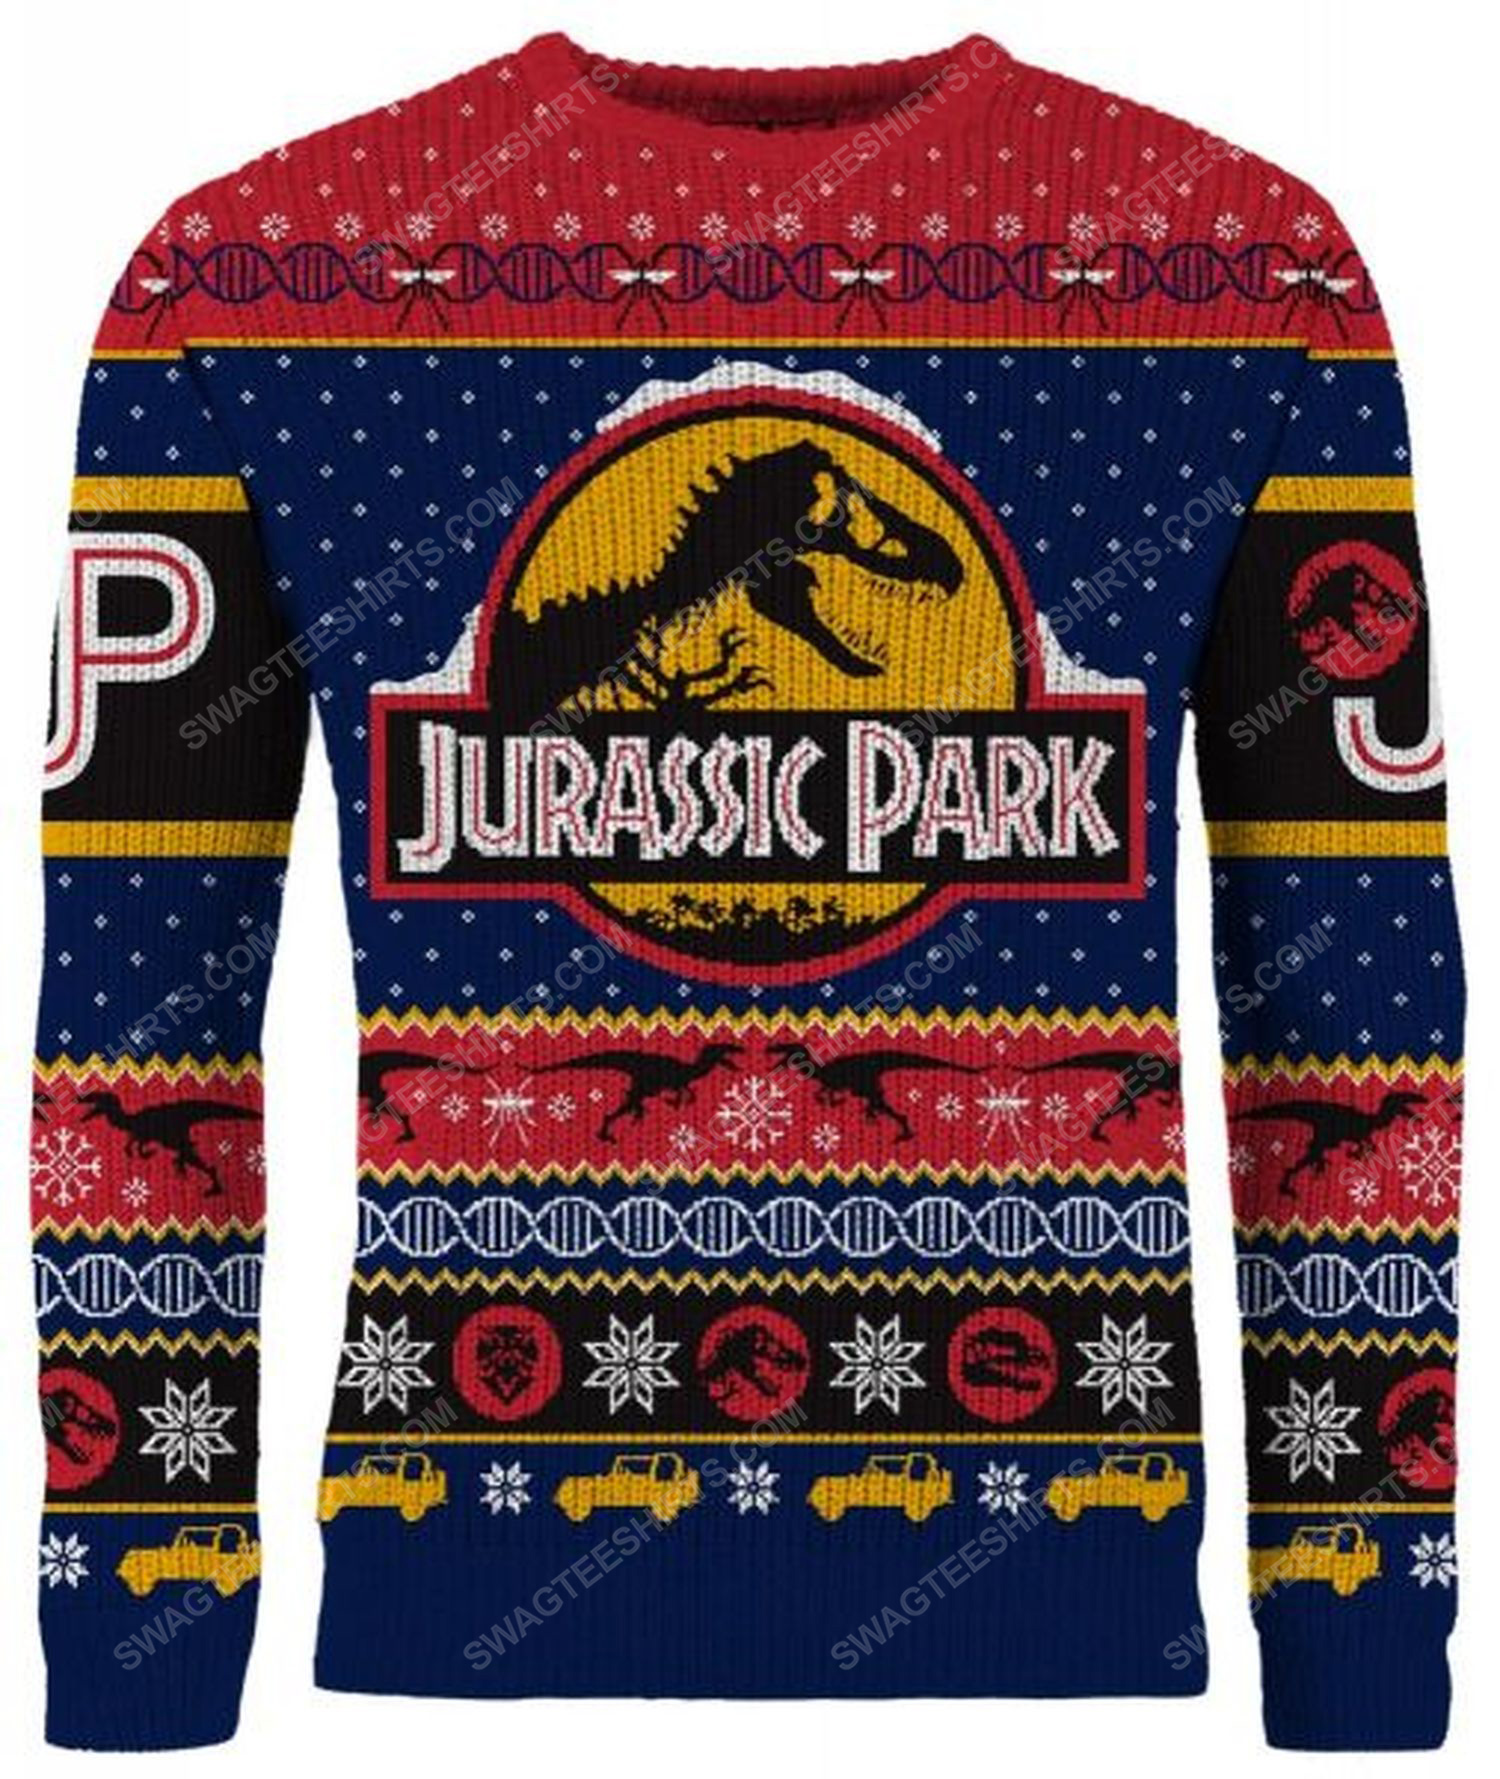 [special edition] Christmas holiday jurassic park movie full print ugly christmas sweater – maria